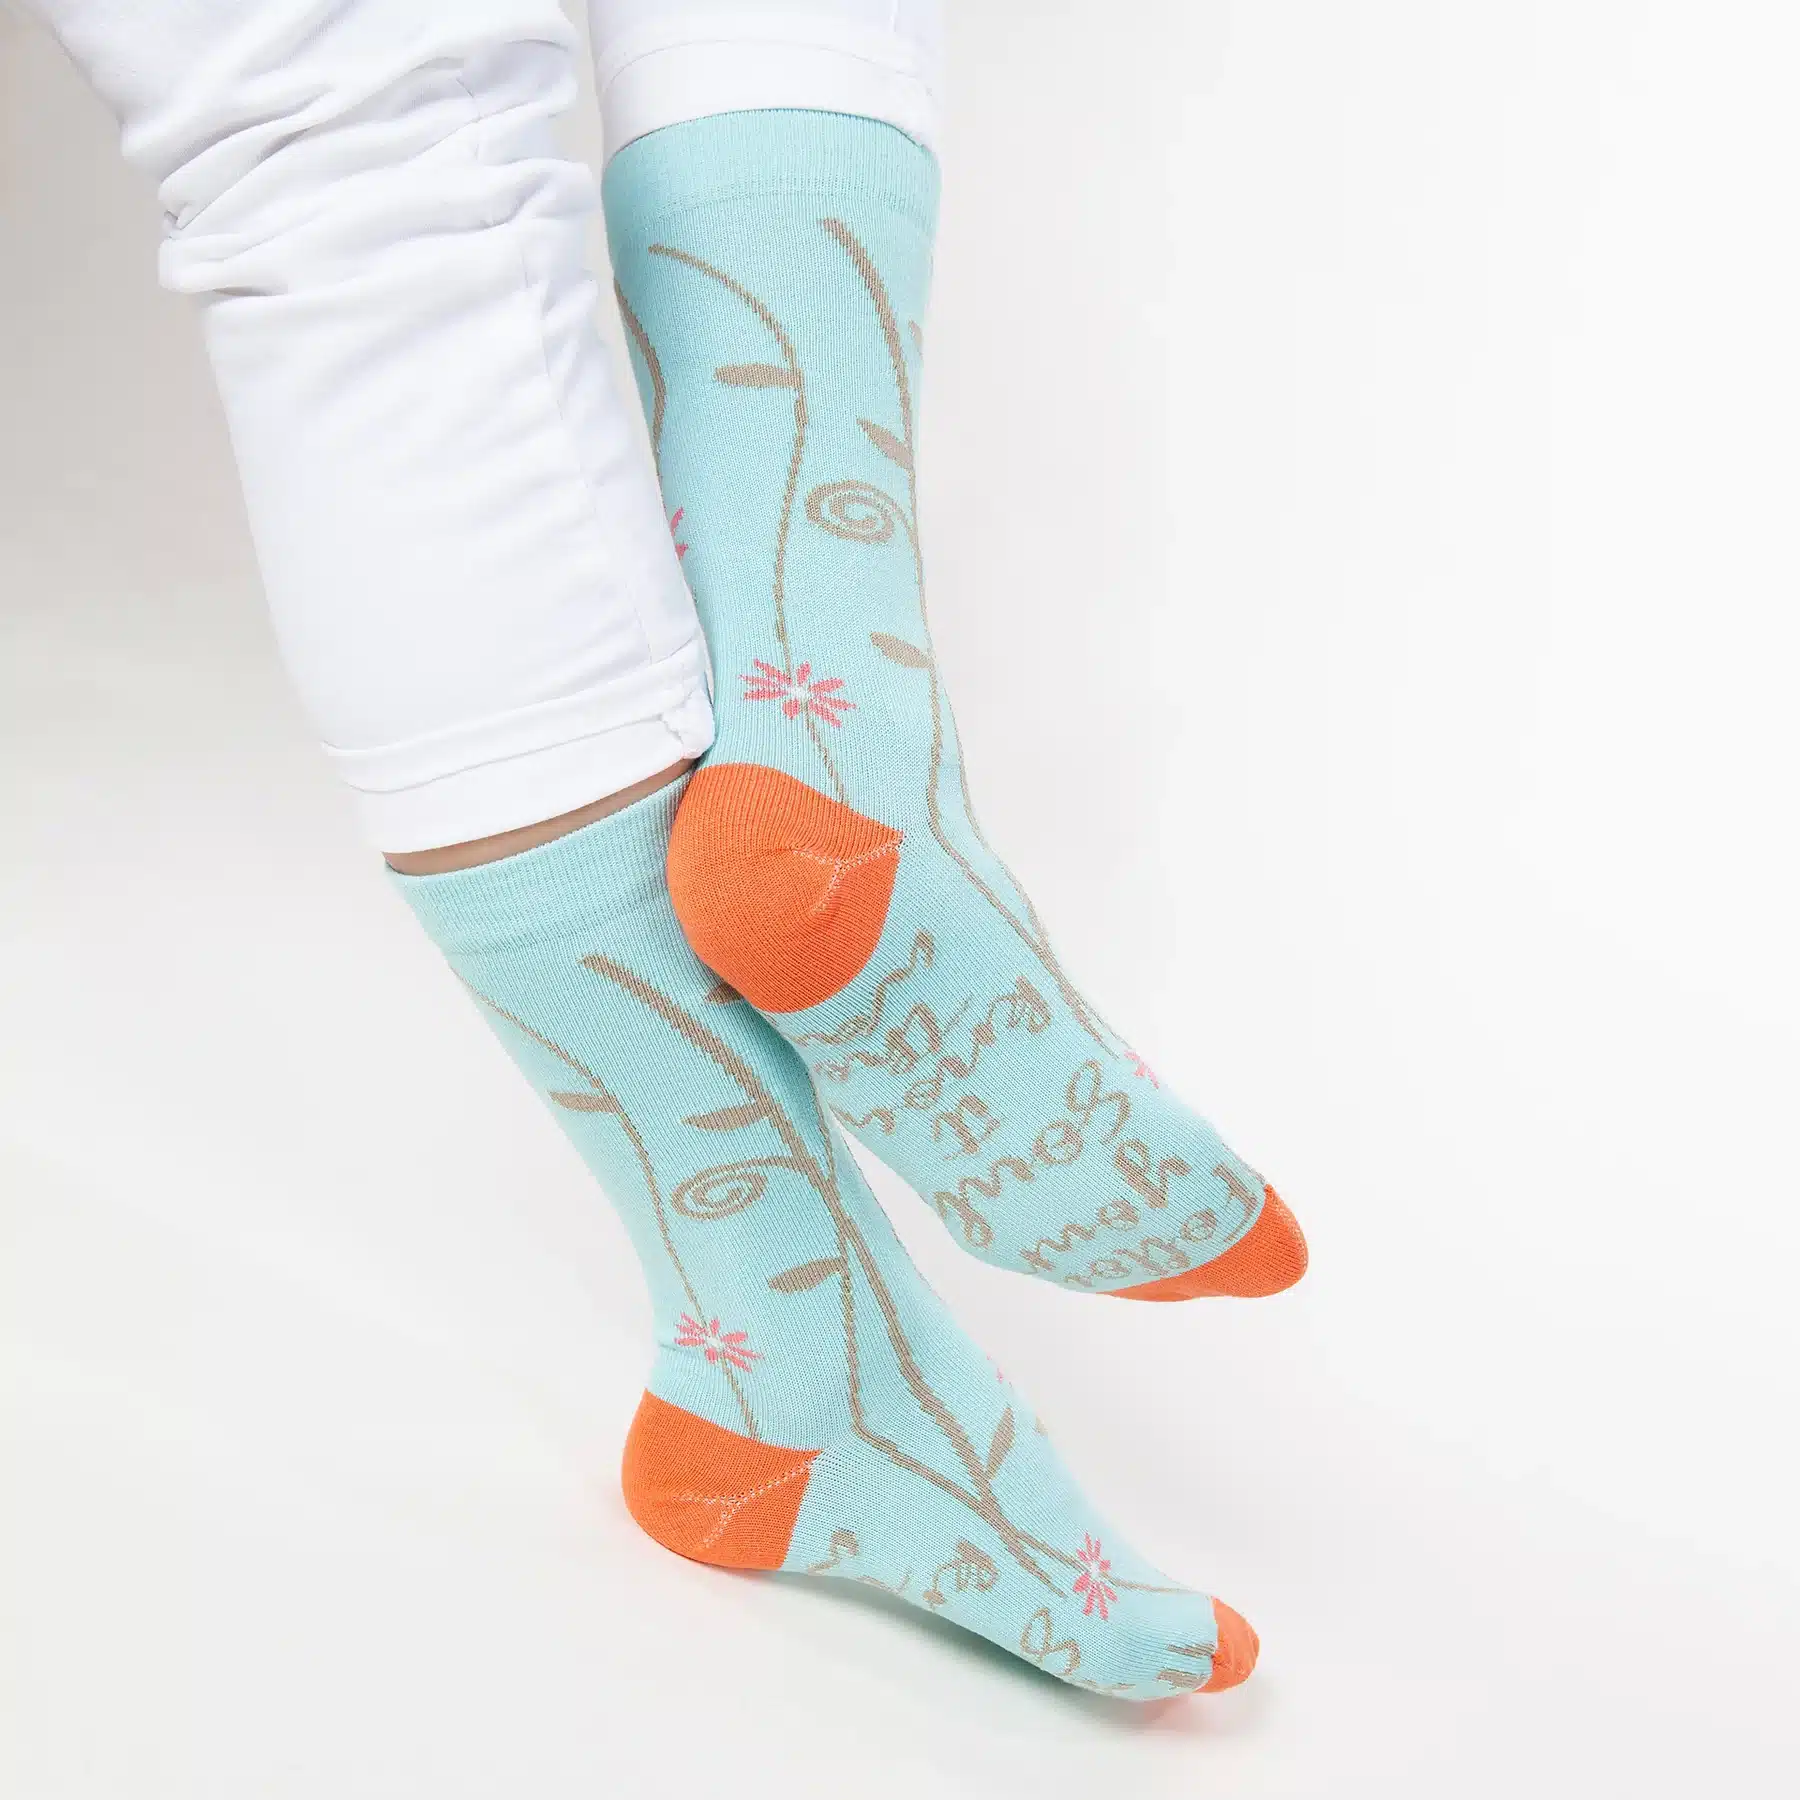 Follow Your Soul Turquoise Floral Crew Socks image